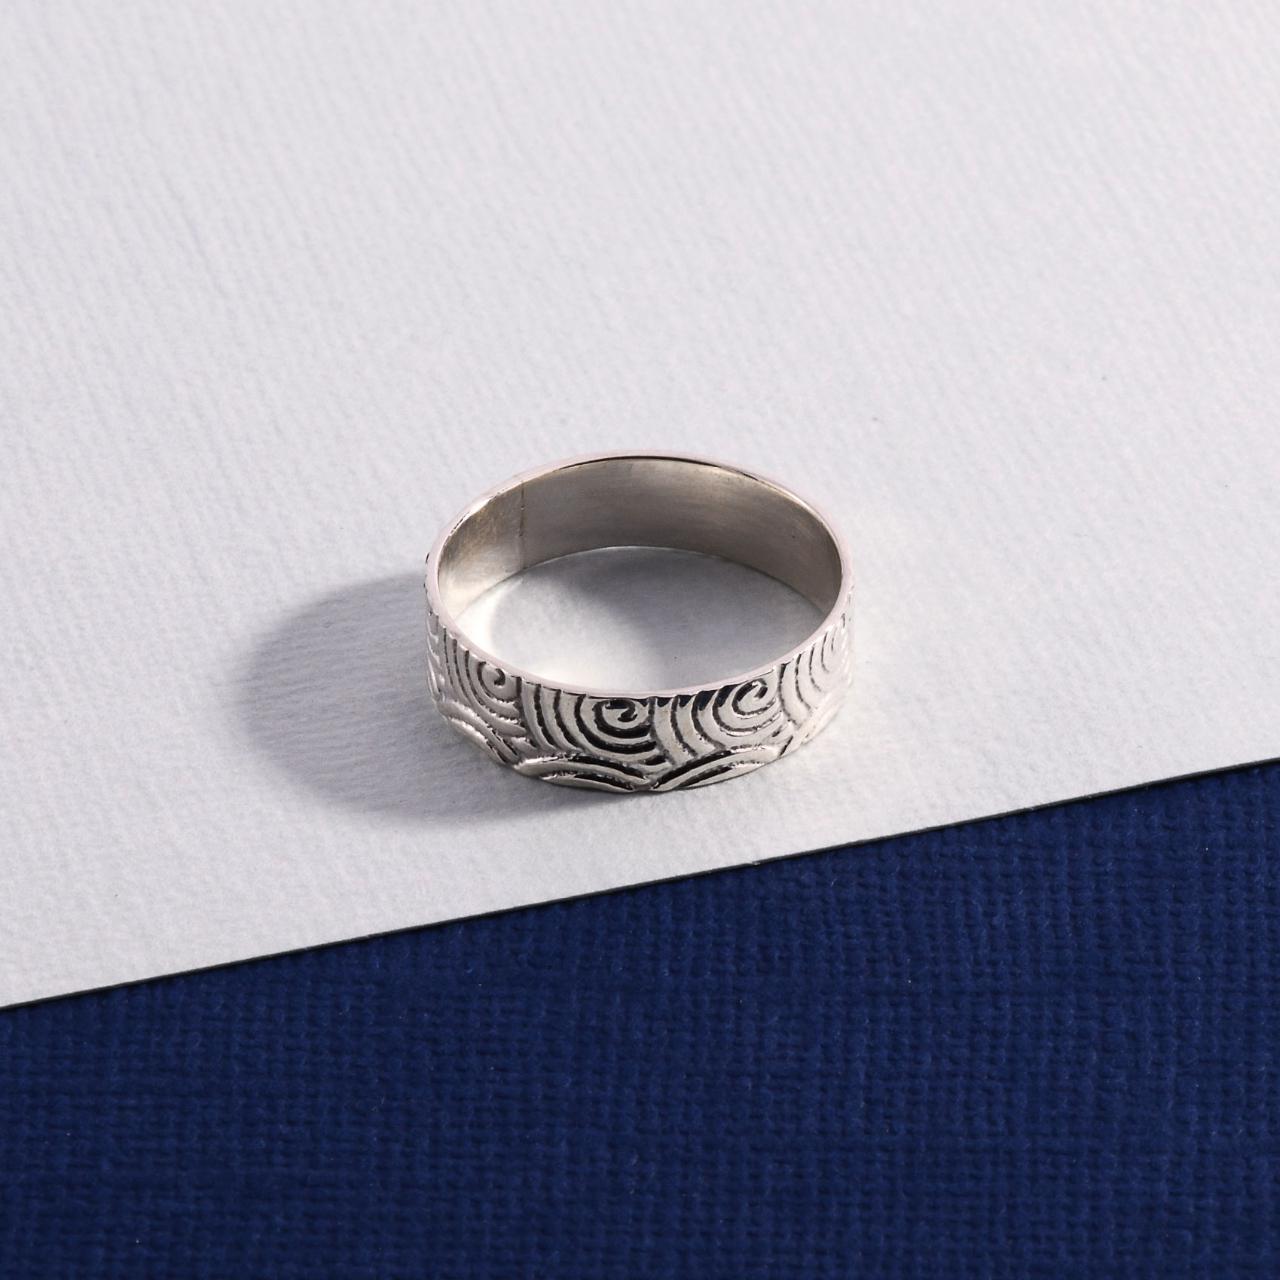 Product Image 2 - Sterling Silver Ring

Size 8

925 Symbol